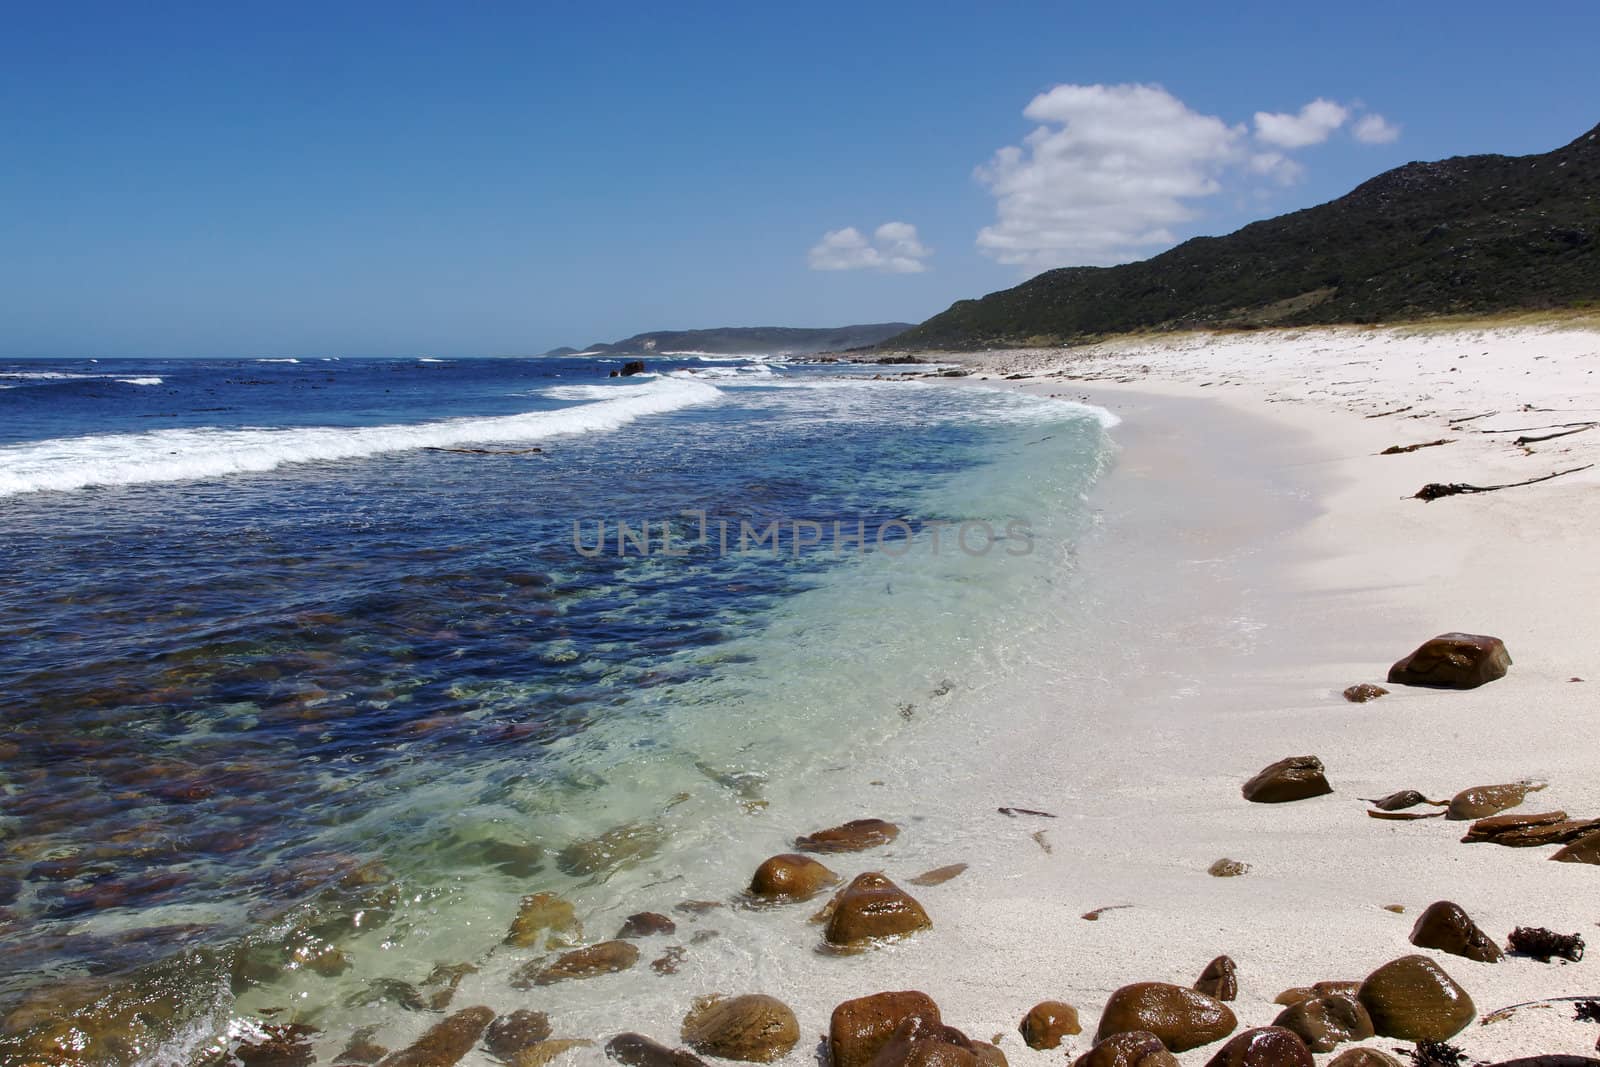 The cold, clear waters of the Atlantic Ocean at Maclear Beach, in the Cape of Good Hope area of the Cape Peninsula, South Africa.